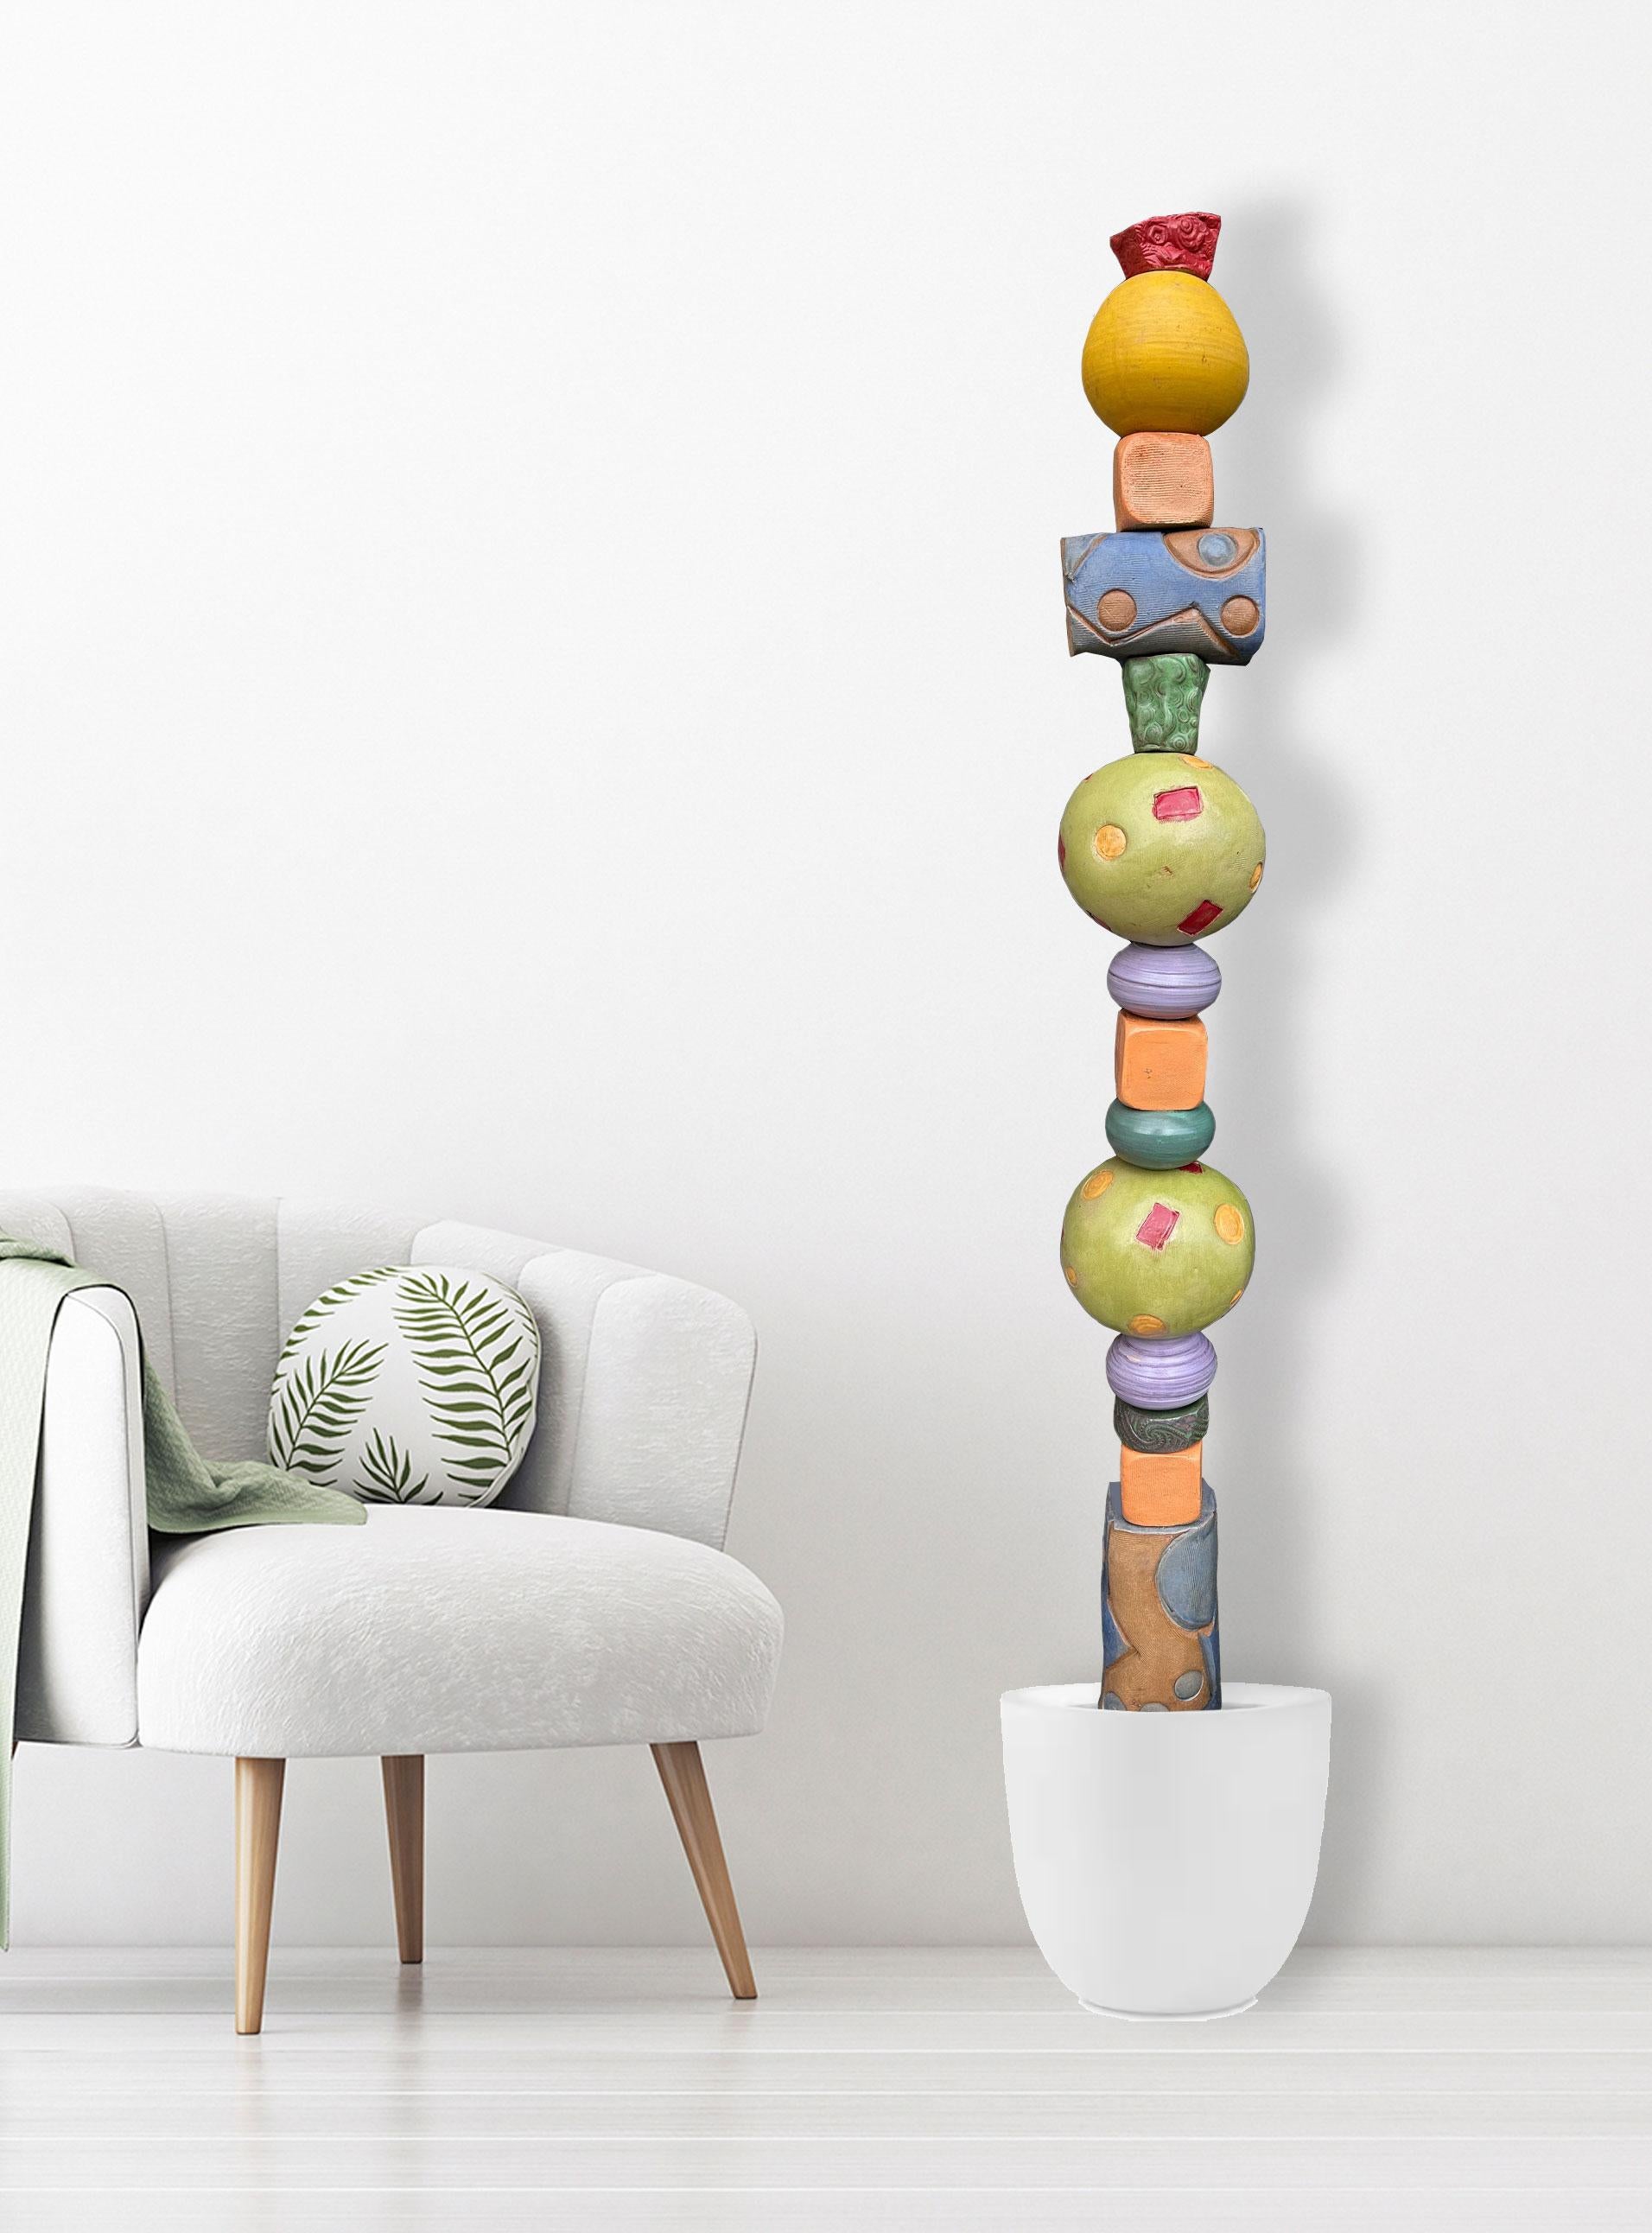 Abstract Totem - Glazed Ceramic Sculpture For Outdoor Garden or Indoors - Contemporary Art by Marc Zimmerman